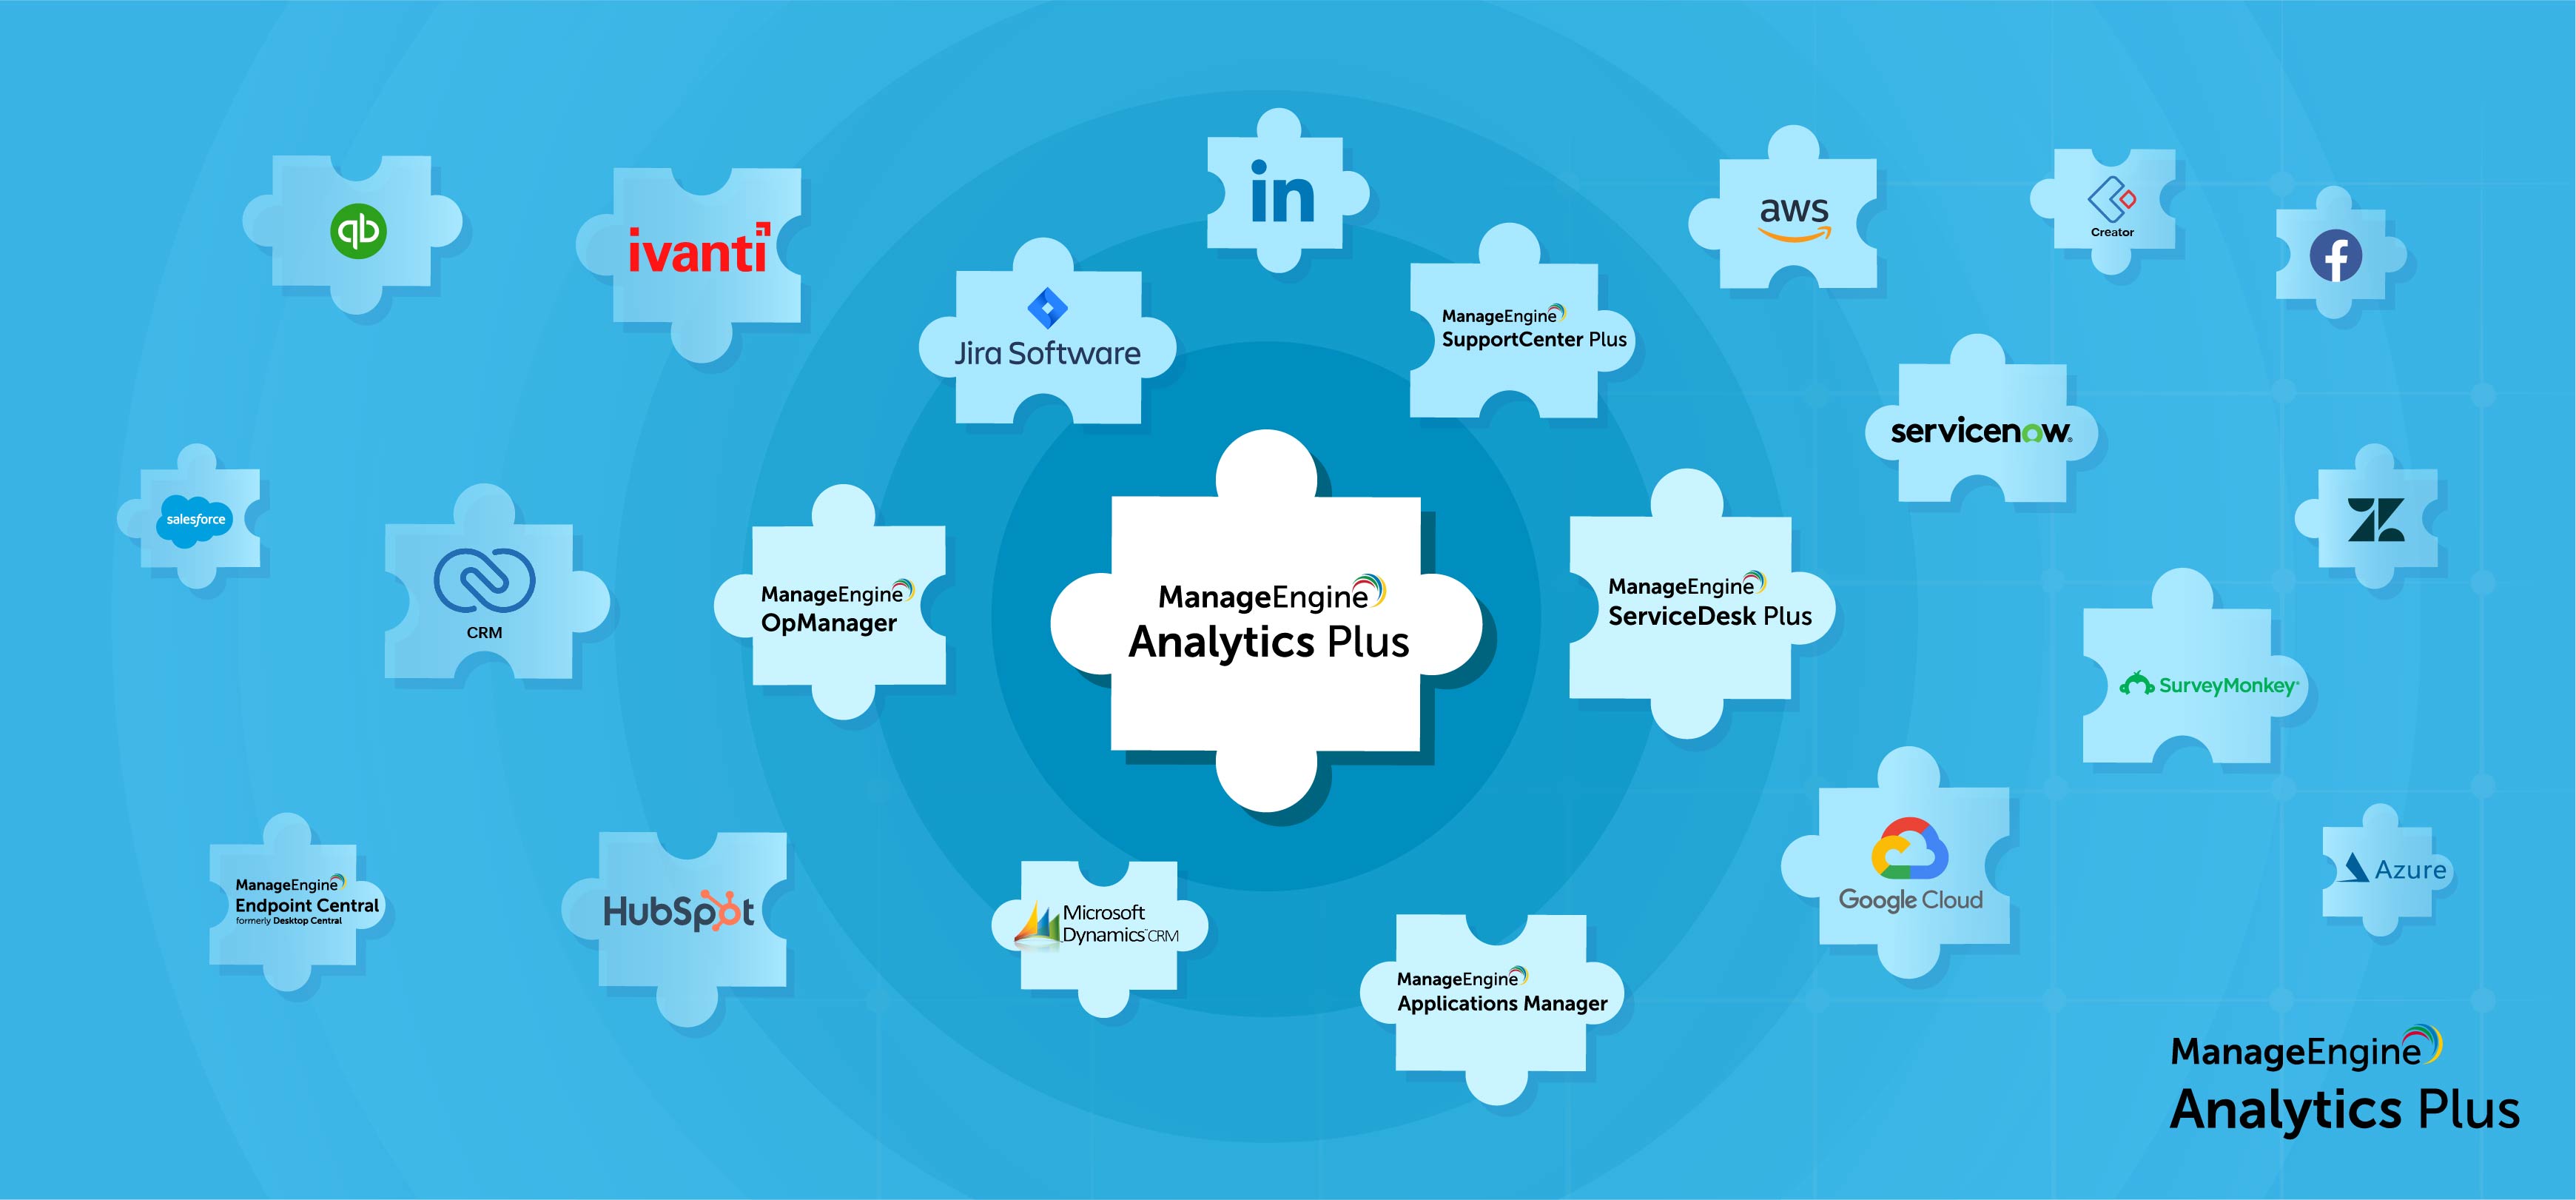 Achieve your business goals by integrating all your IT applications with Analytics Plus 